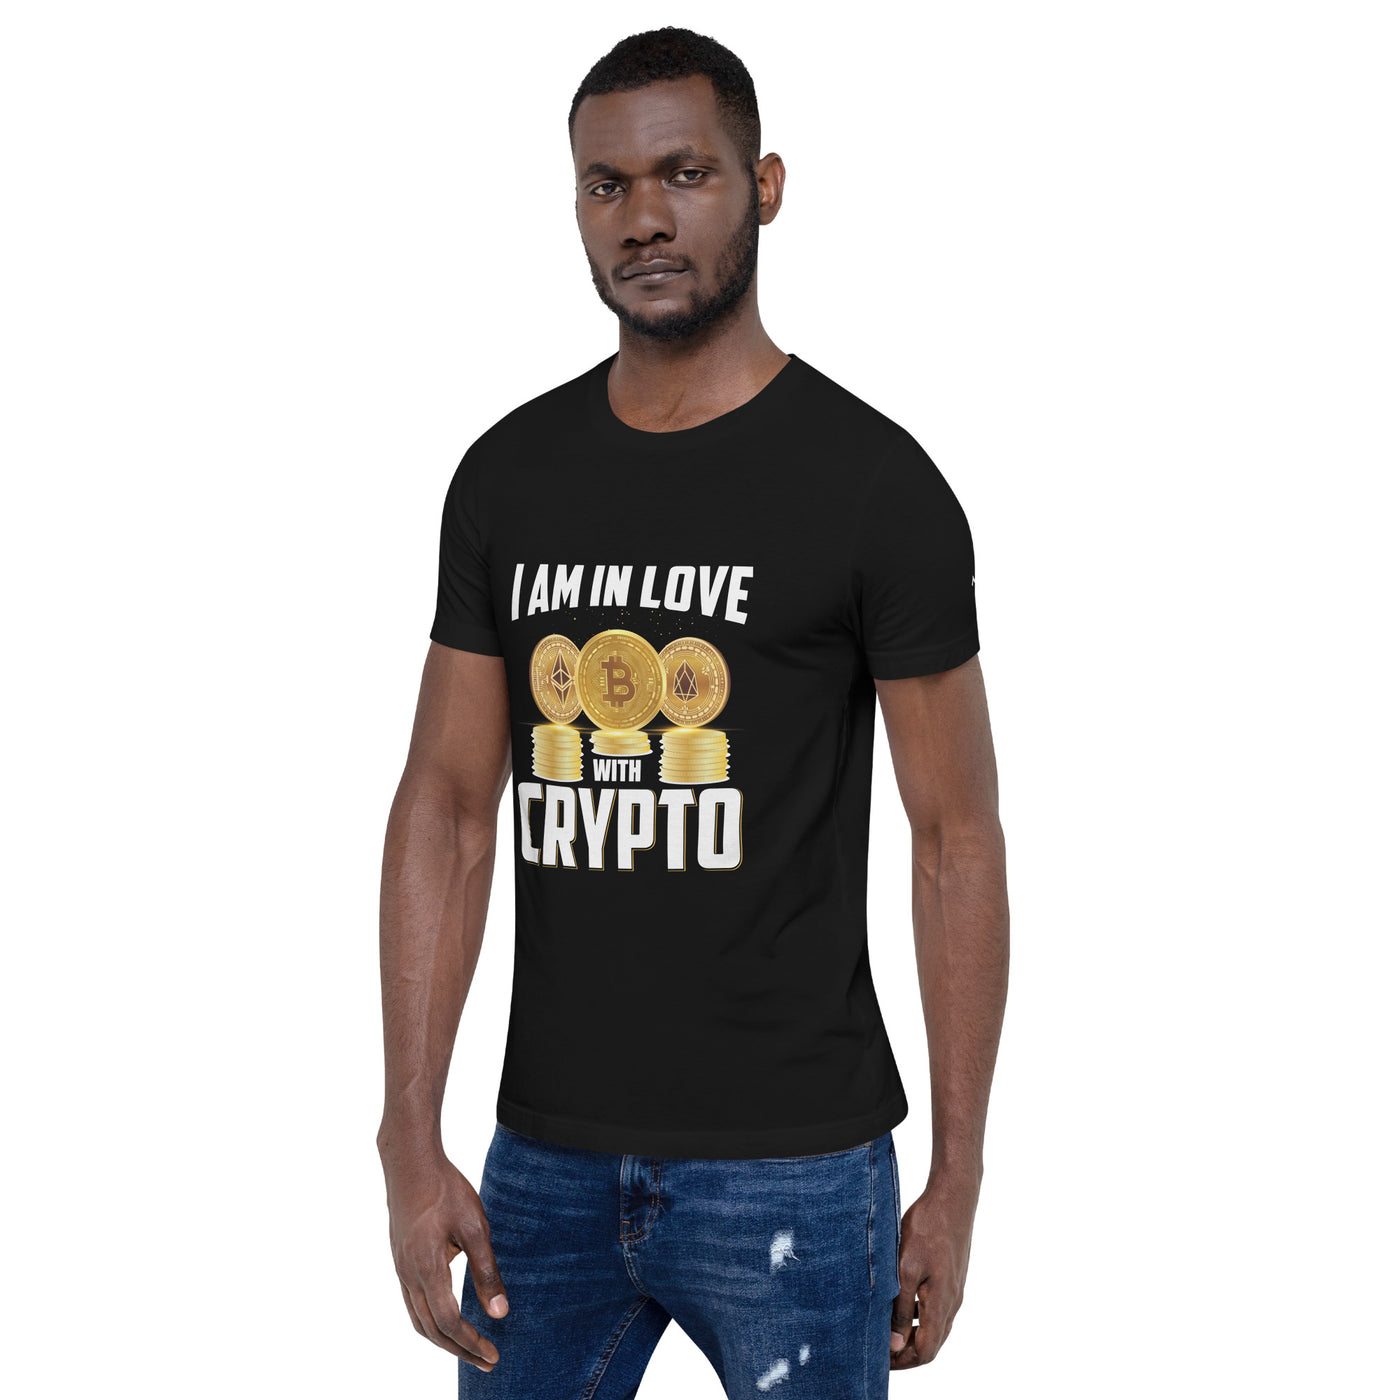 I am in love with Crypto Unisex t-shirt